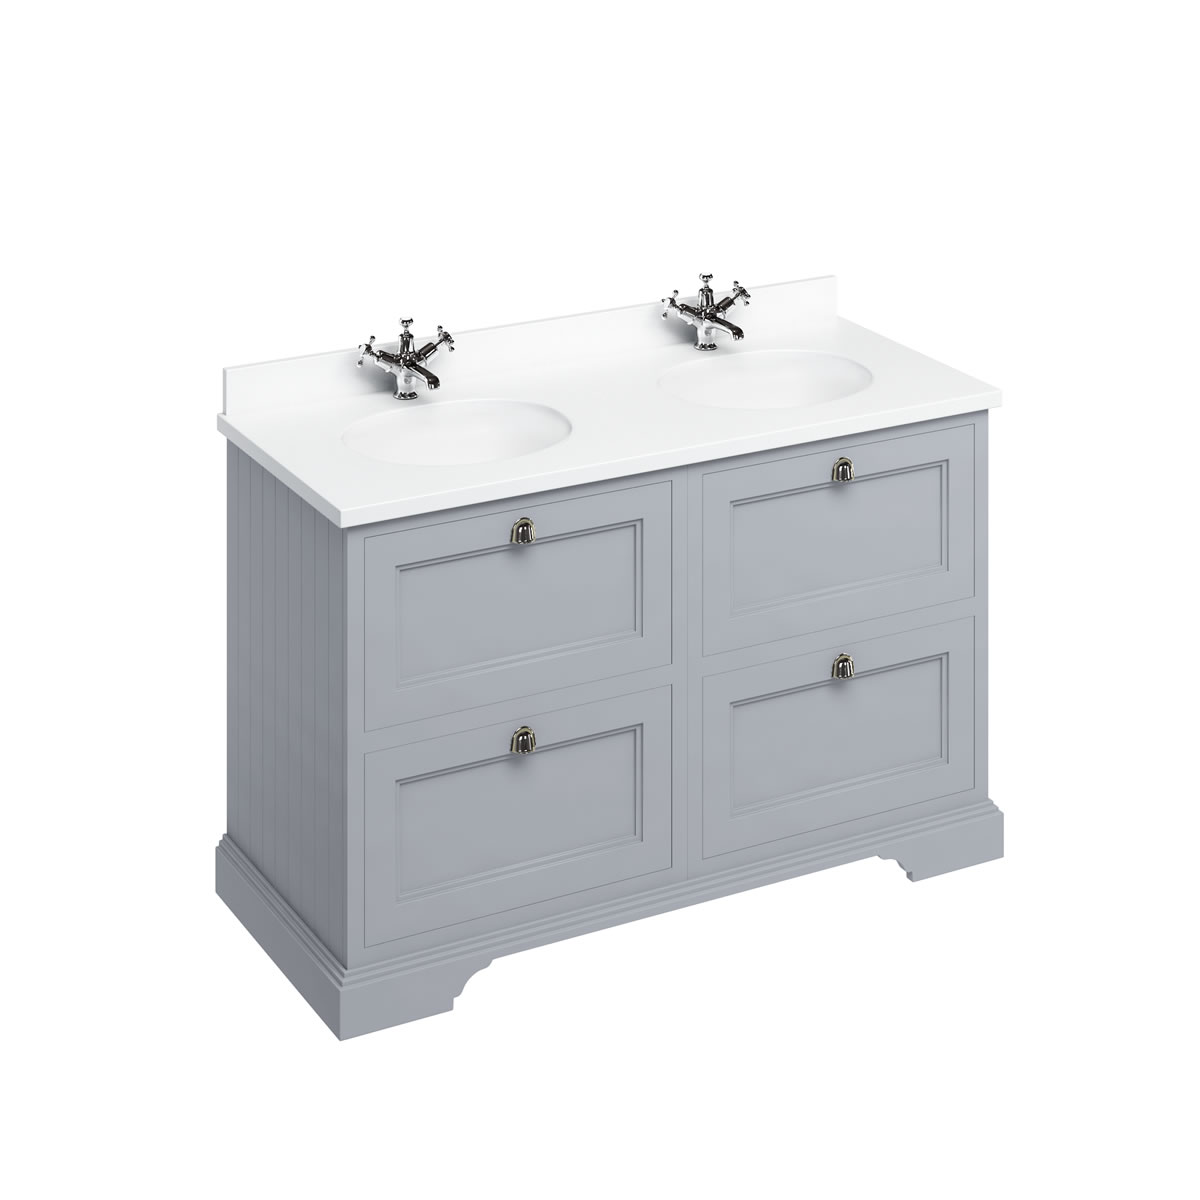 Freestanding 130 Vanity Unit with drawers - Classic Grey and Minerva white worktop with two integrated white basins 